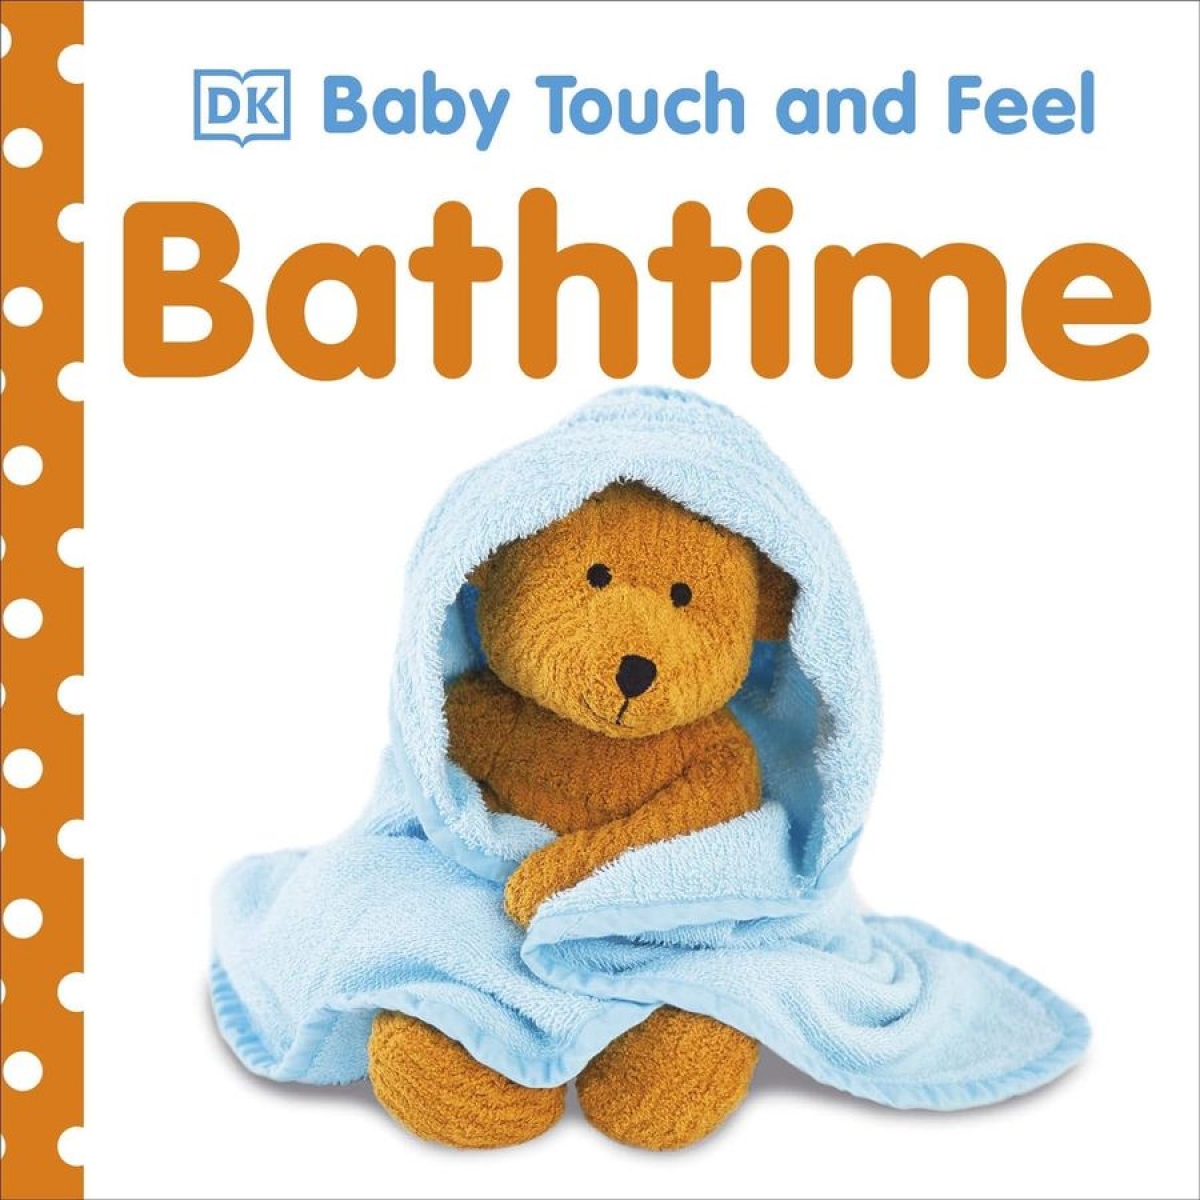 Dorling K. Baby Touch and Feel Bathtime 